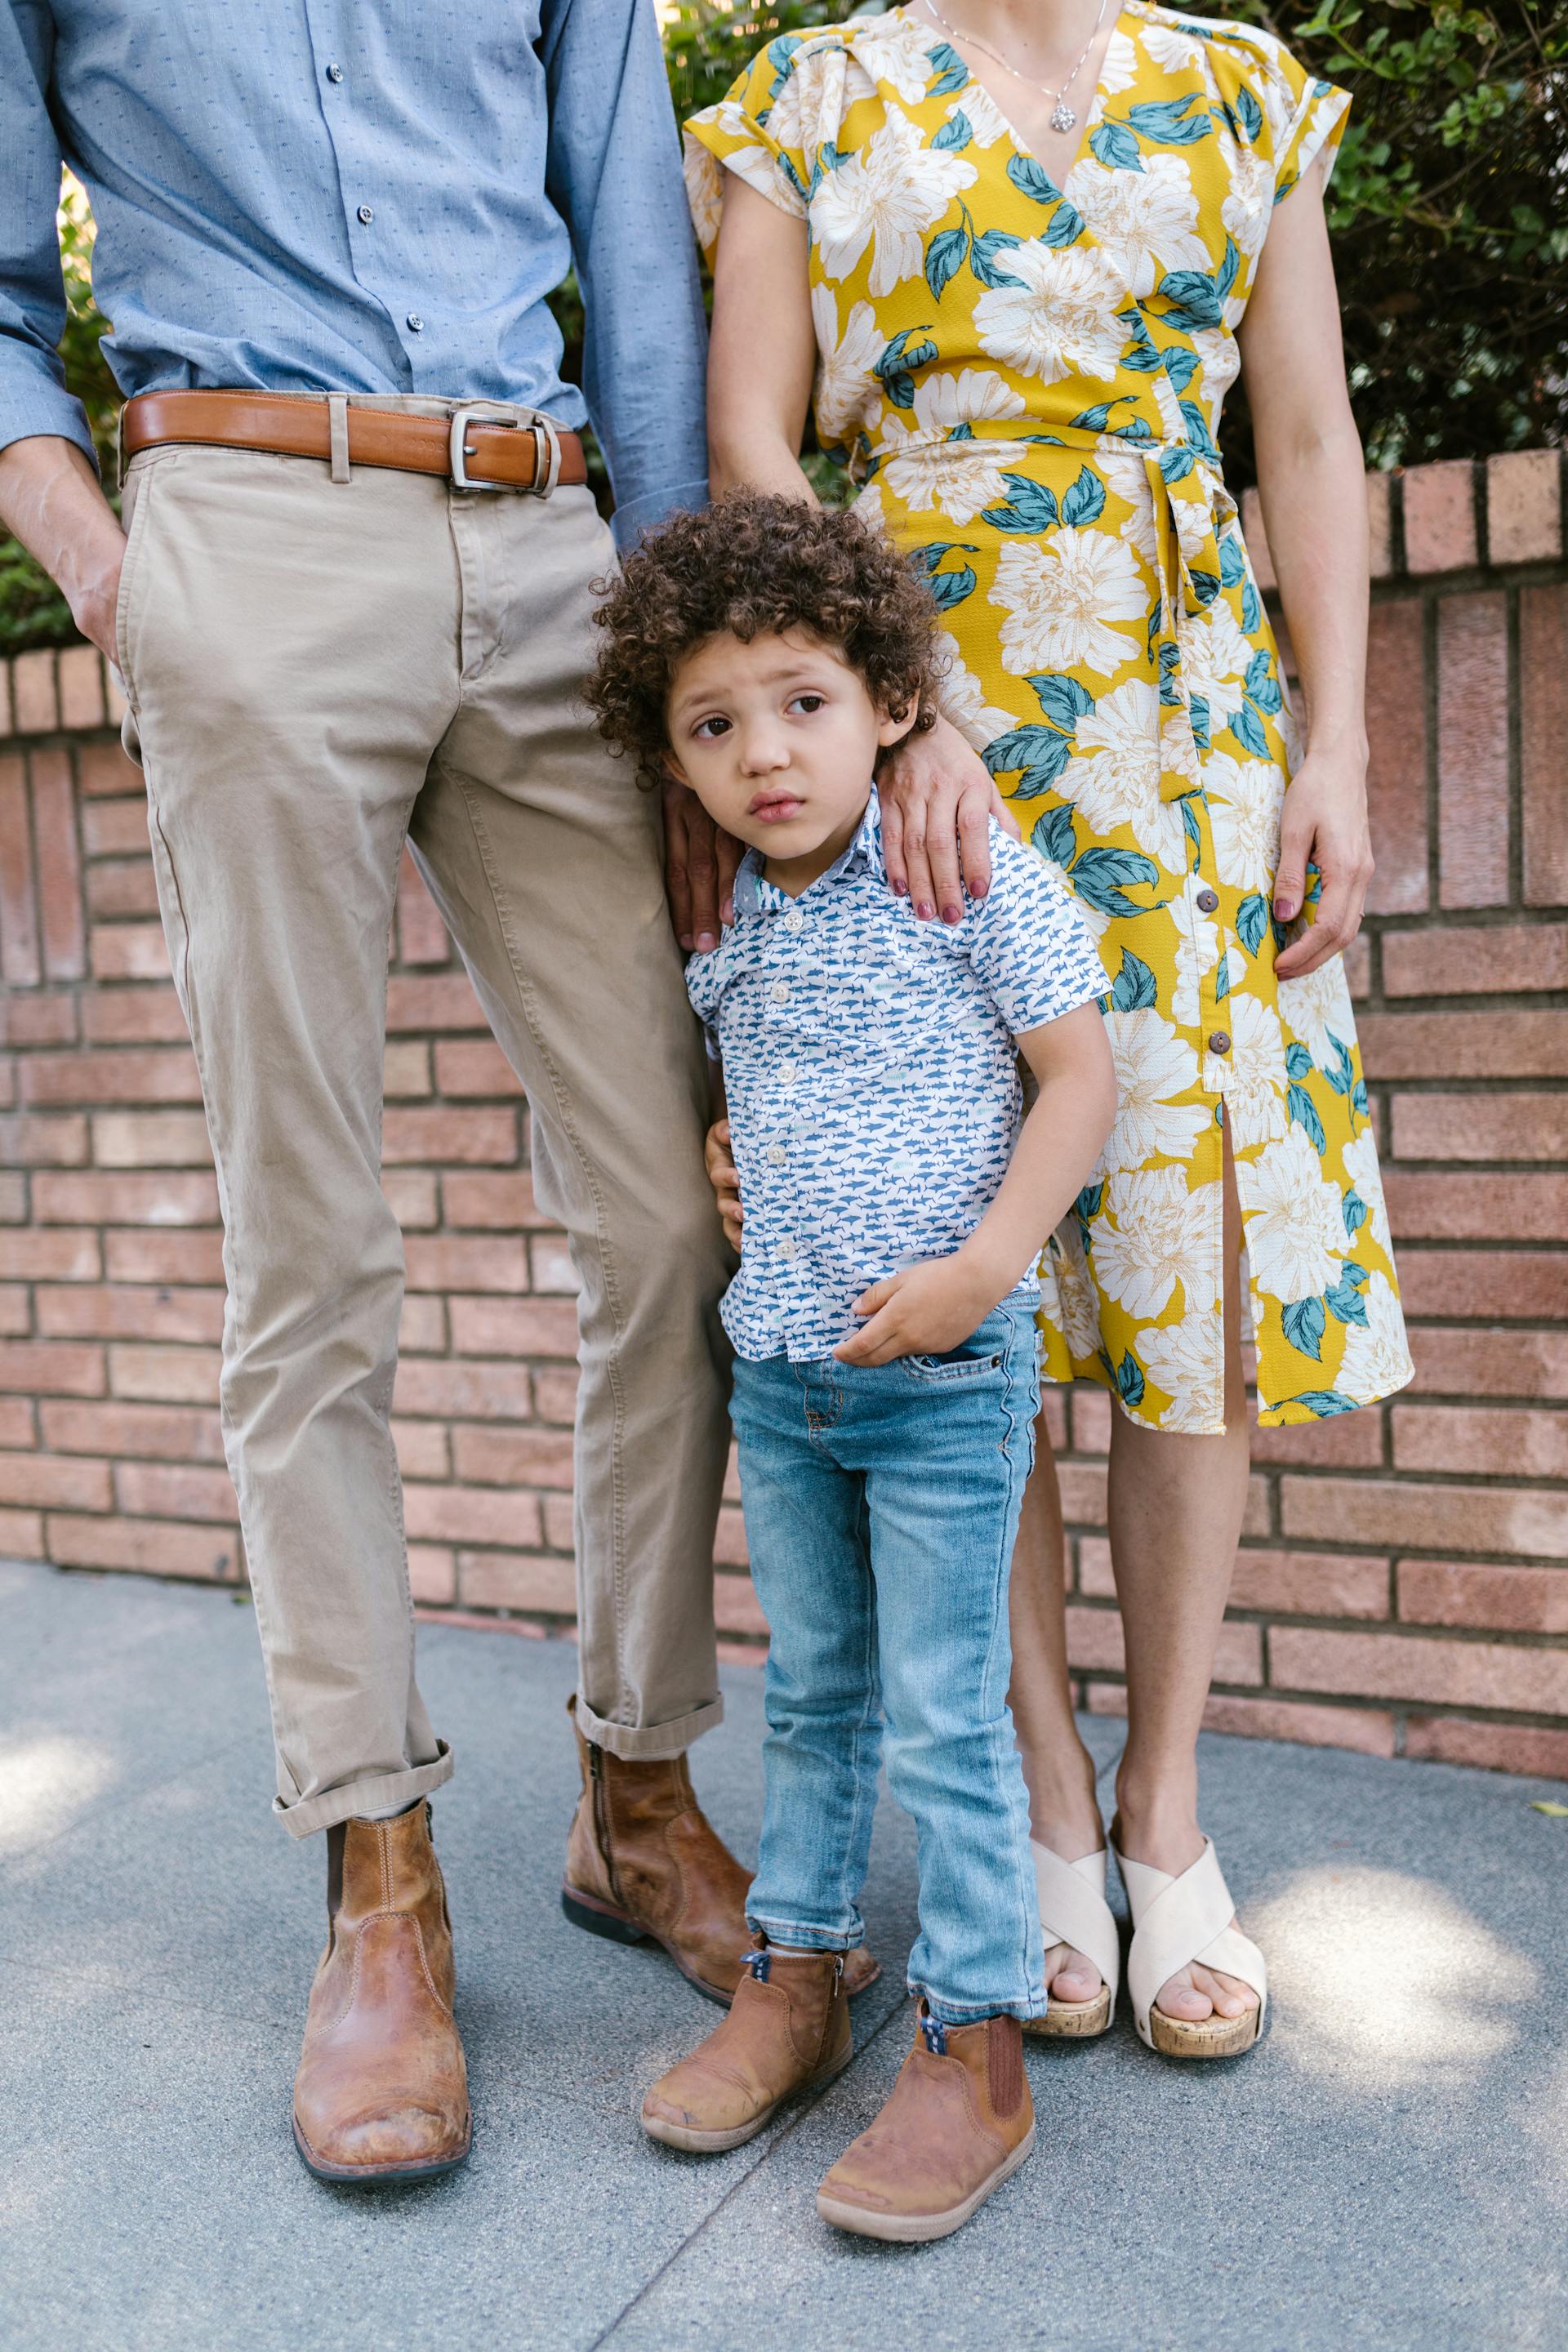 A couple with a young boy | Source: Pexels